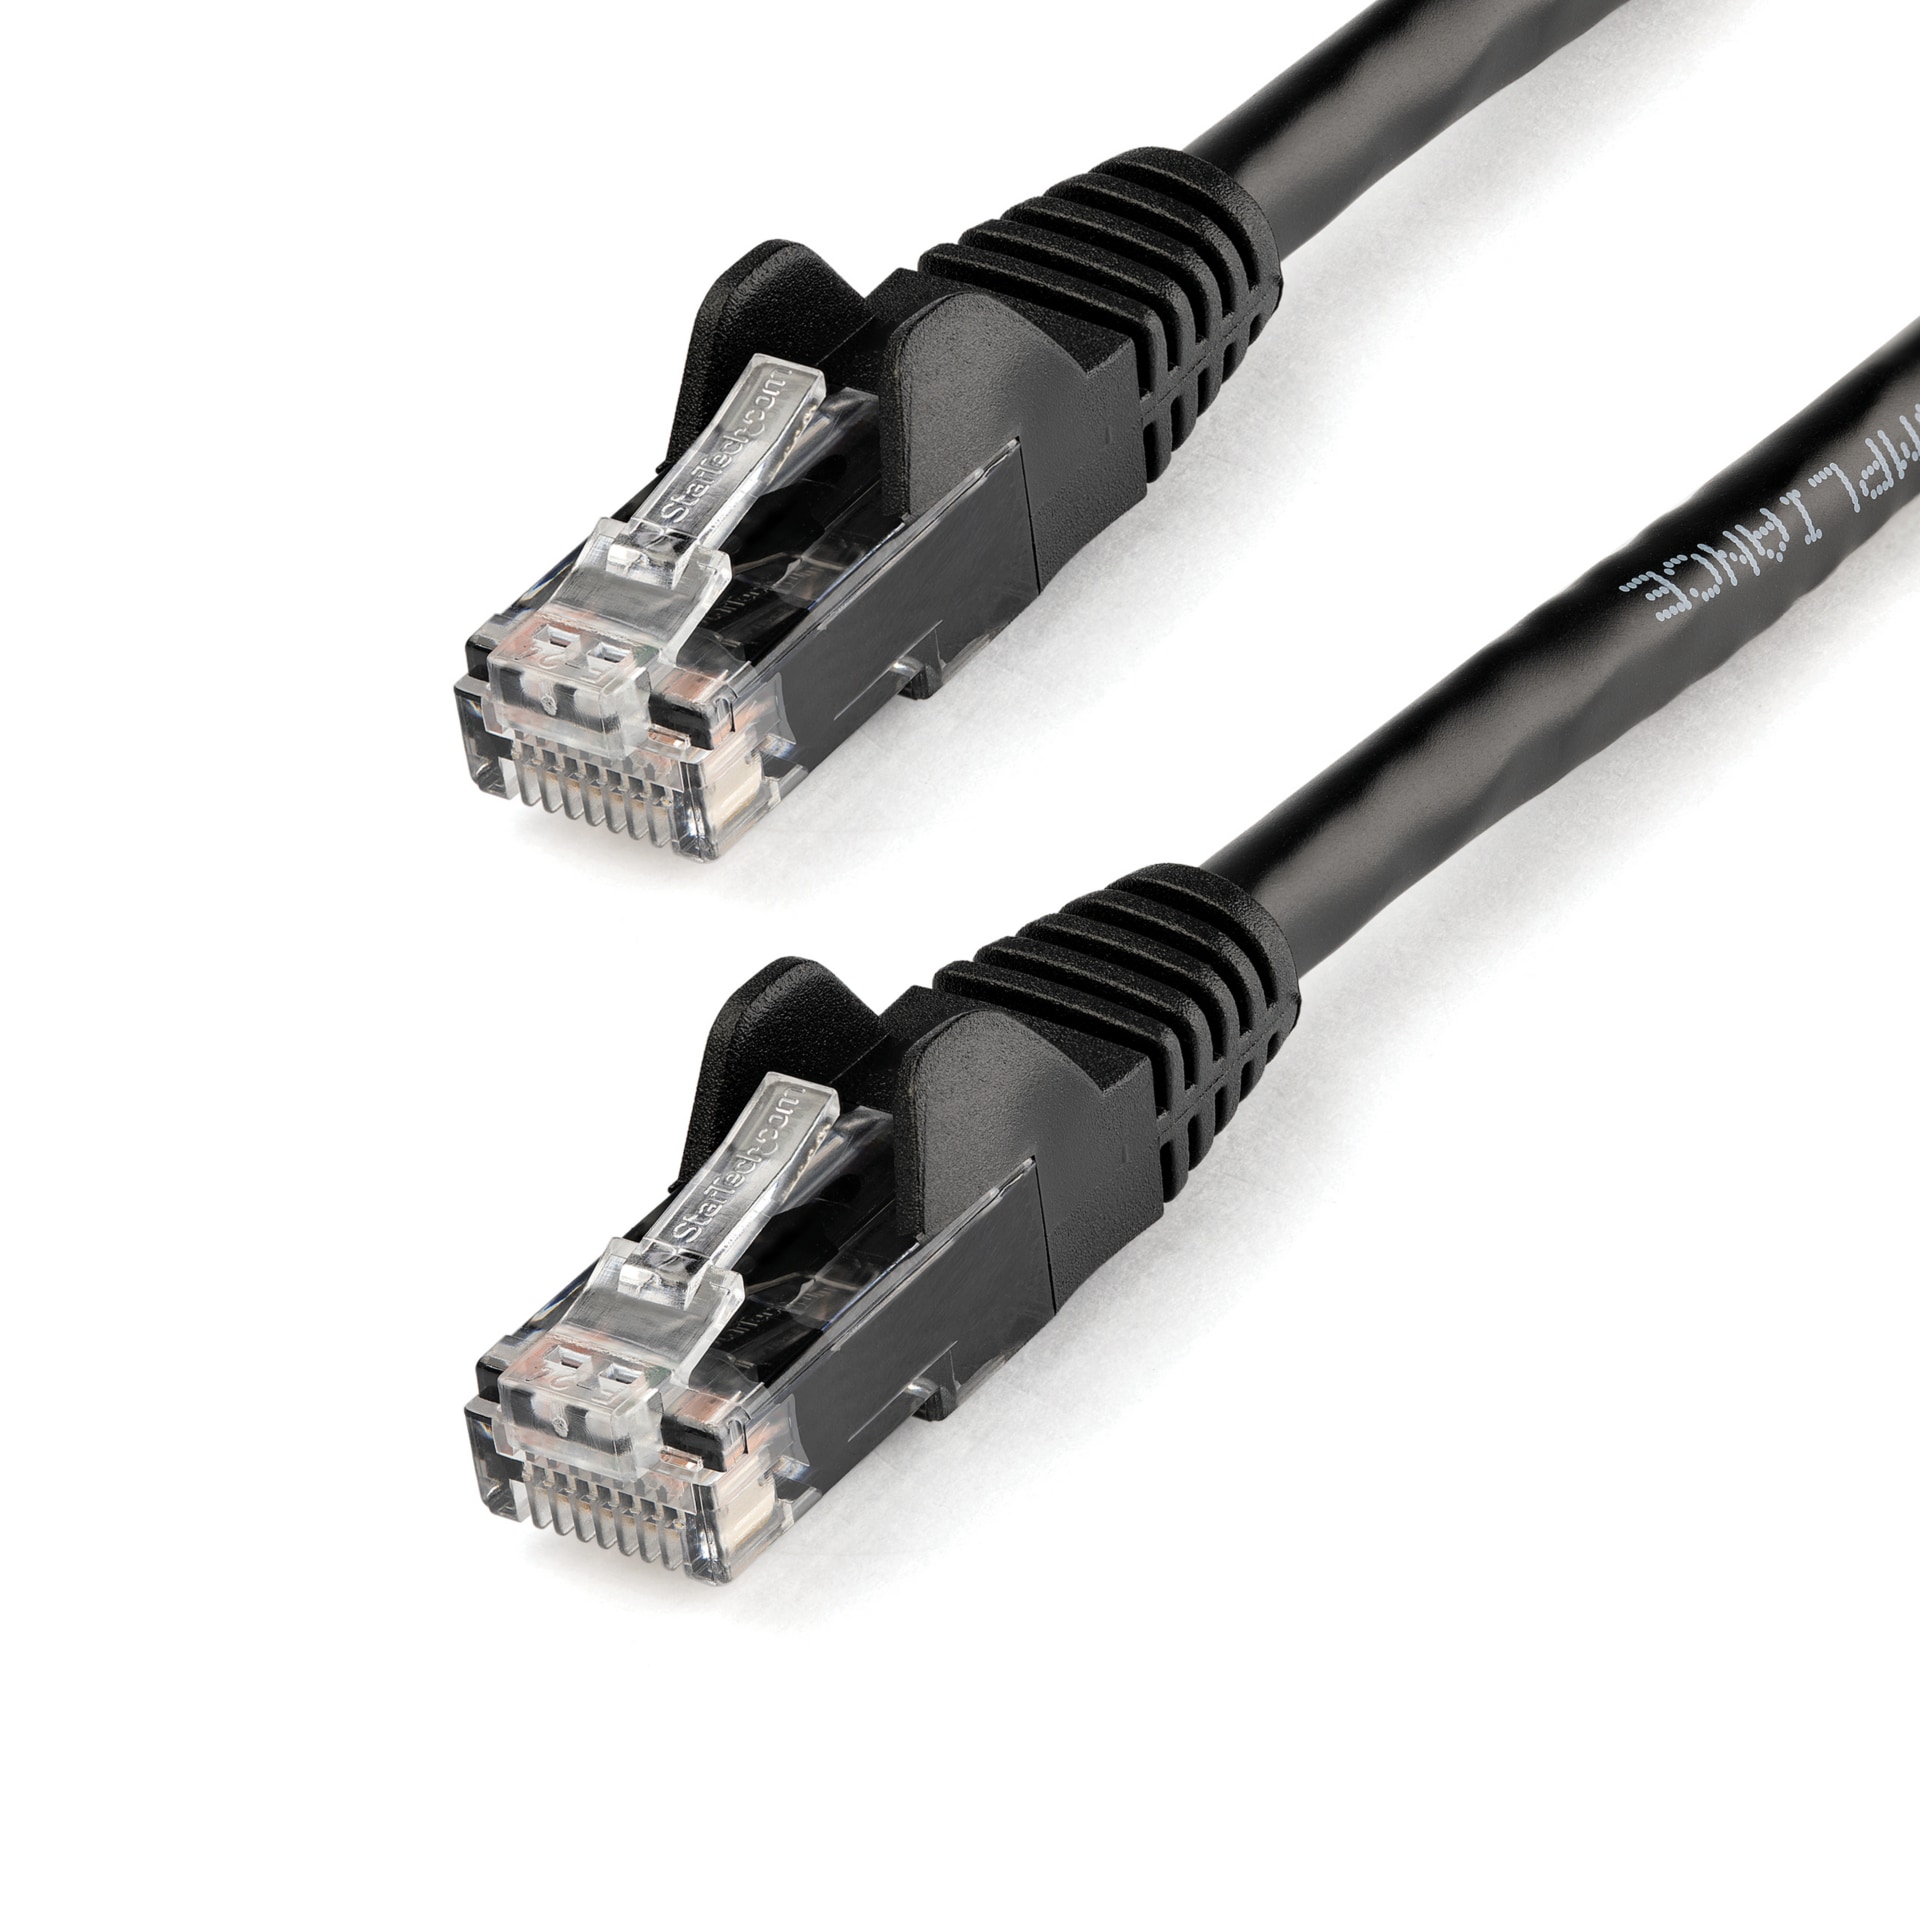 StarTech.com CAT6 Ethernet Cable 75' Black 650MHz PoE Snagless Patch Cord